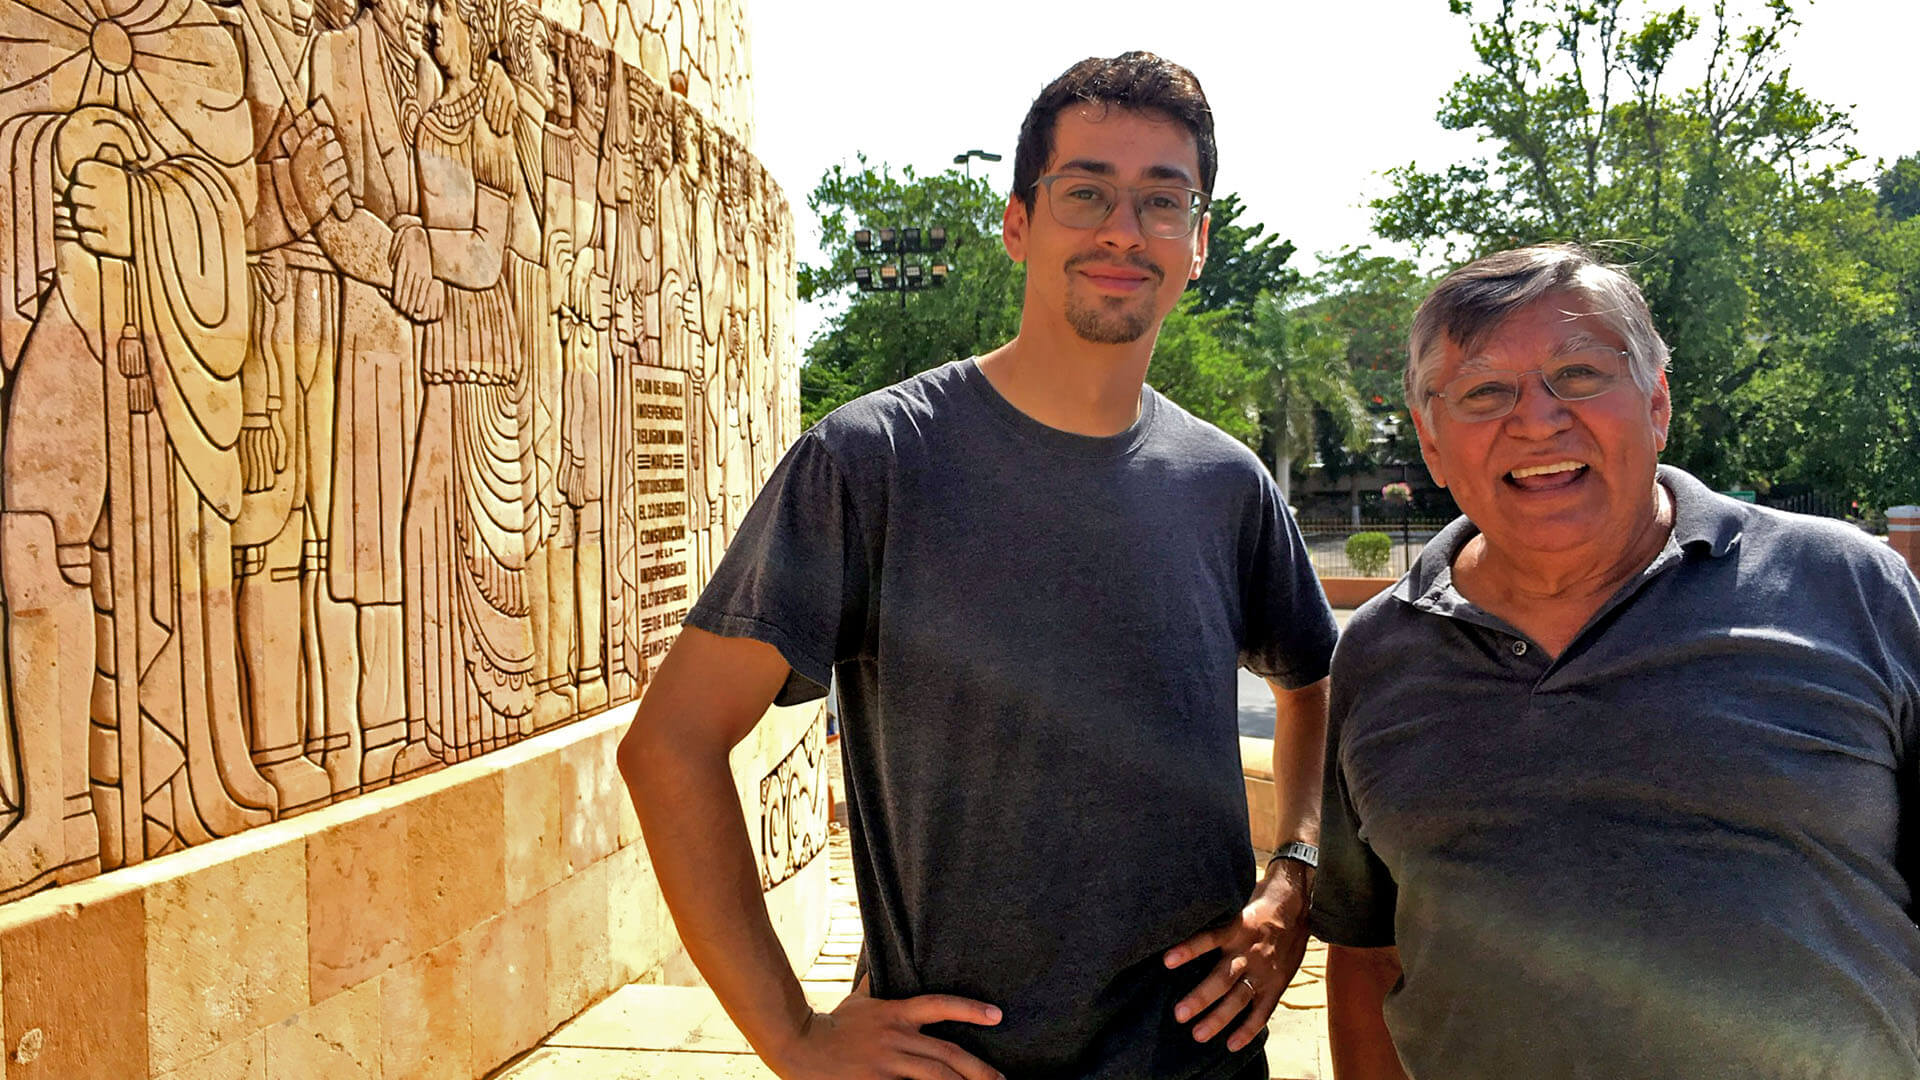 Julio and his dad smile in front of a stone structure with intricate carvings.